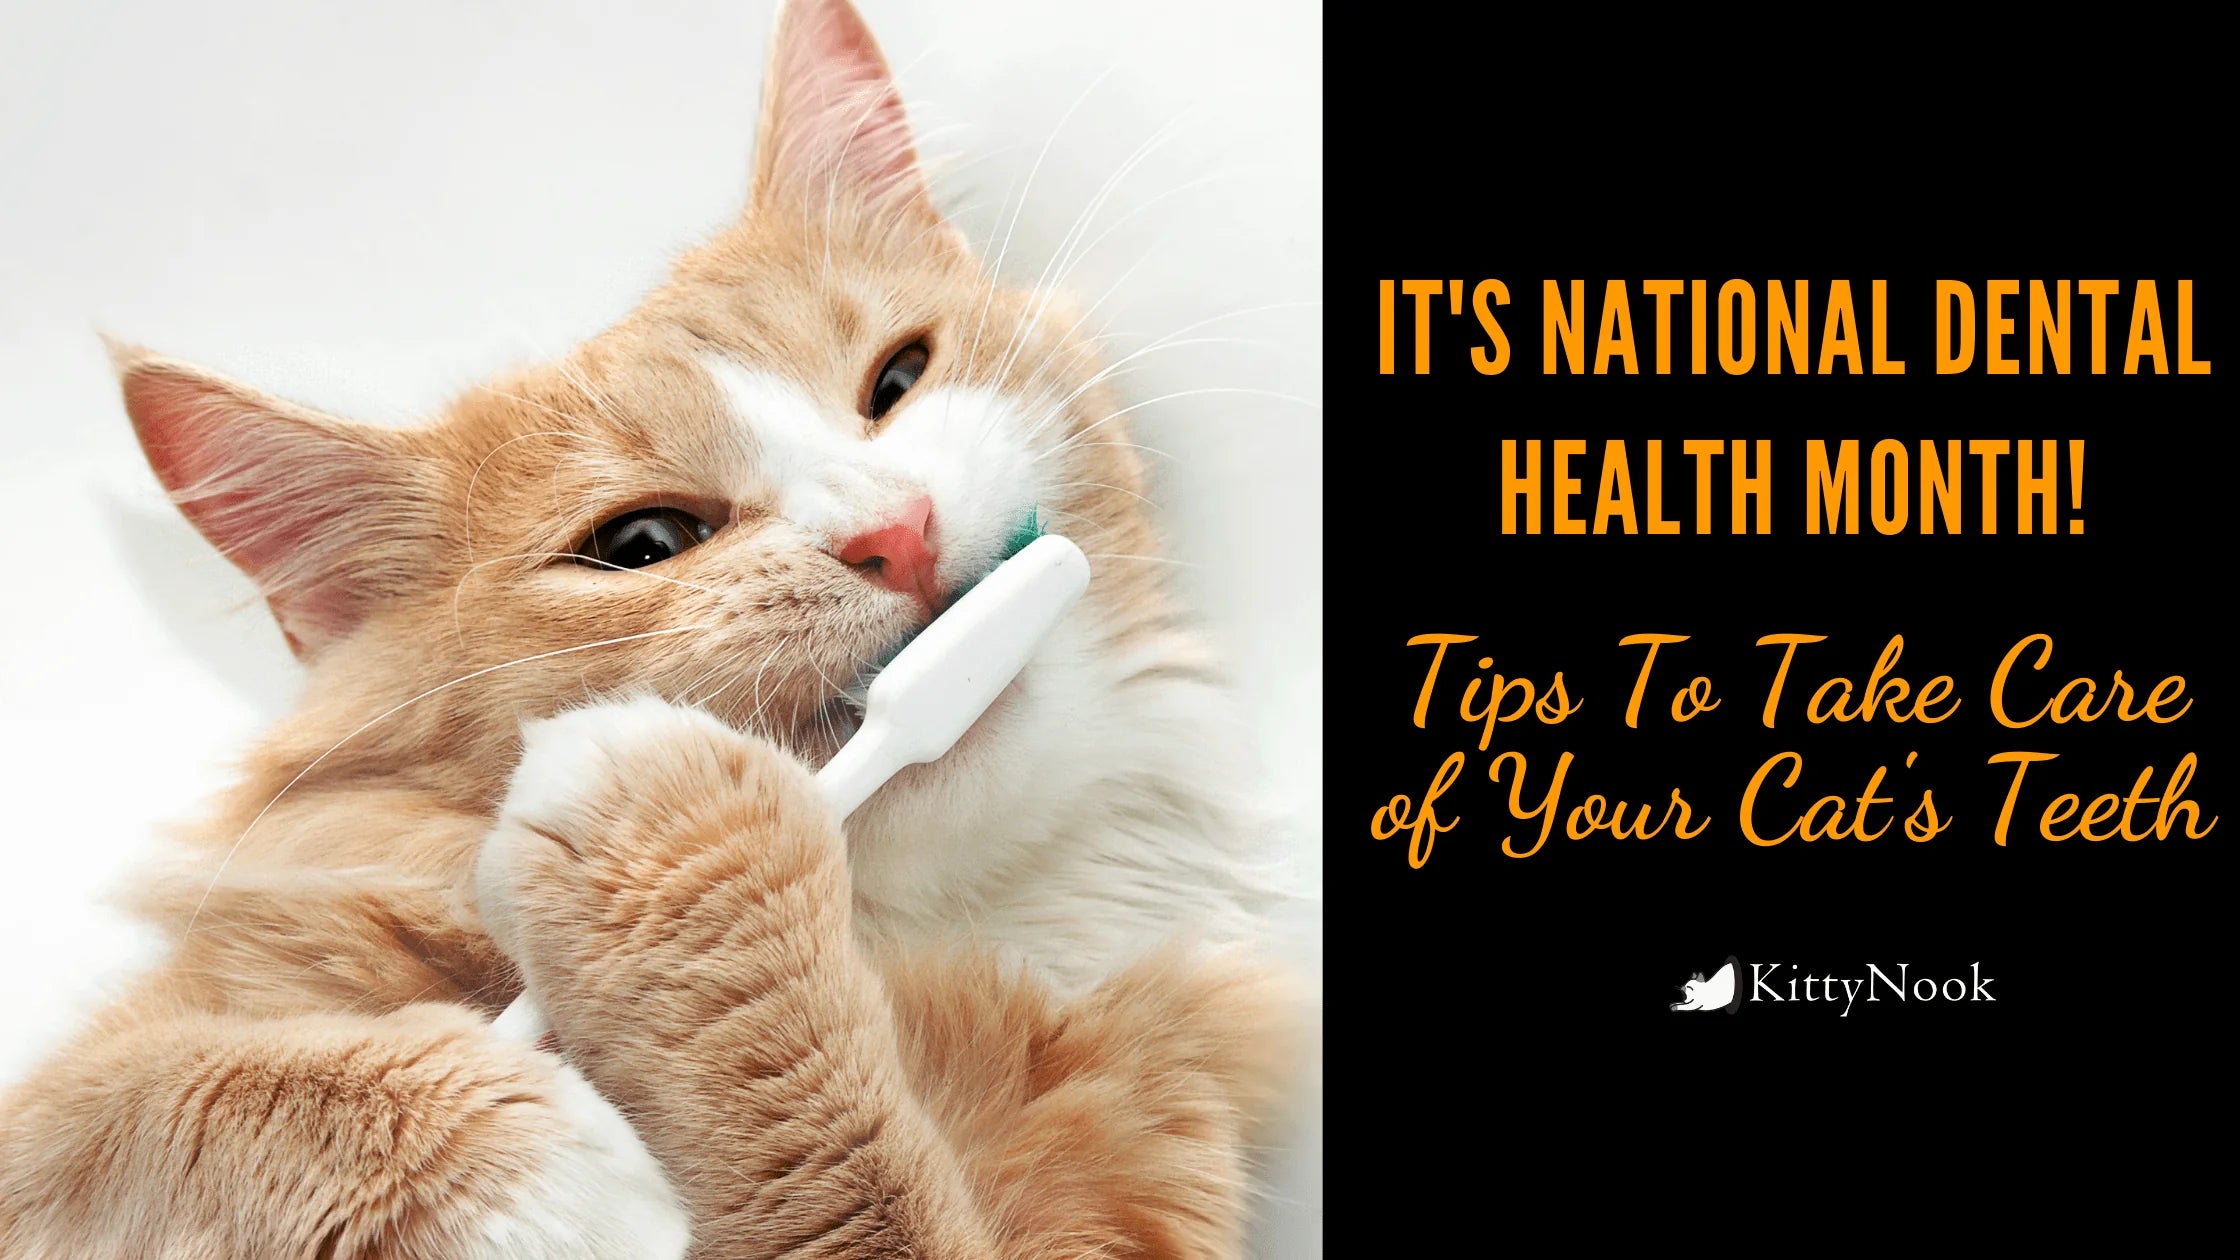 Pet Dental Health Month: Some Care Tips for Your Feline - KittyNook Cat Company